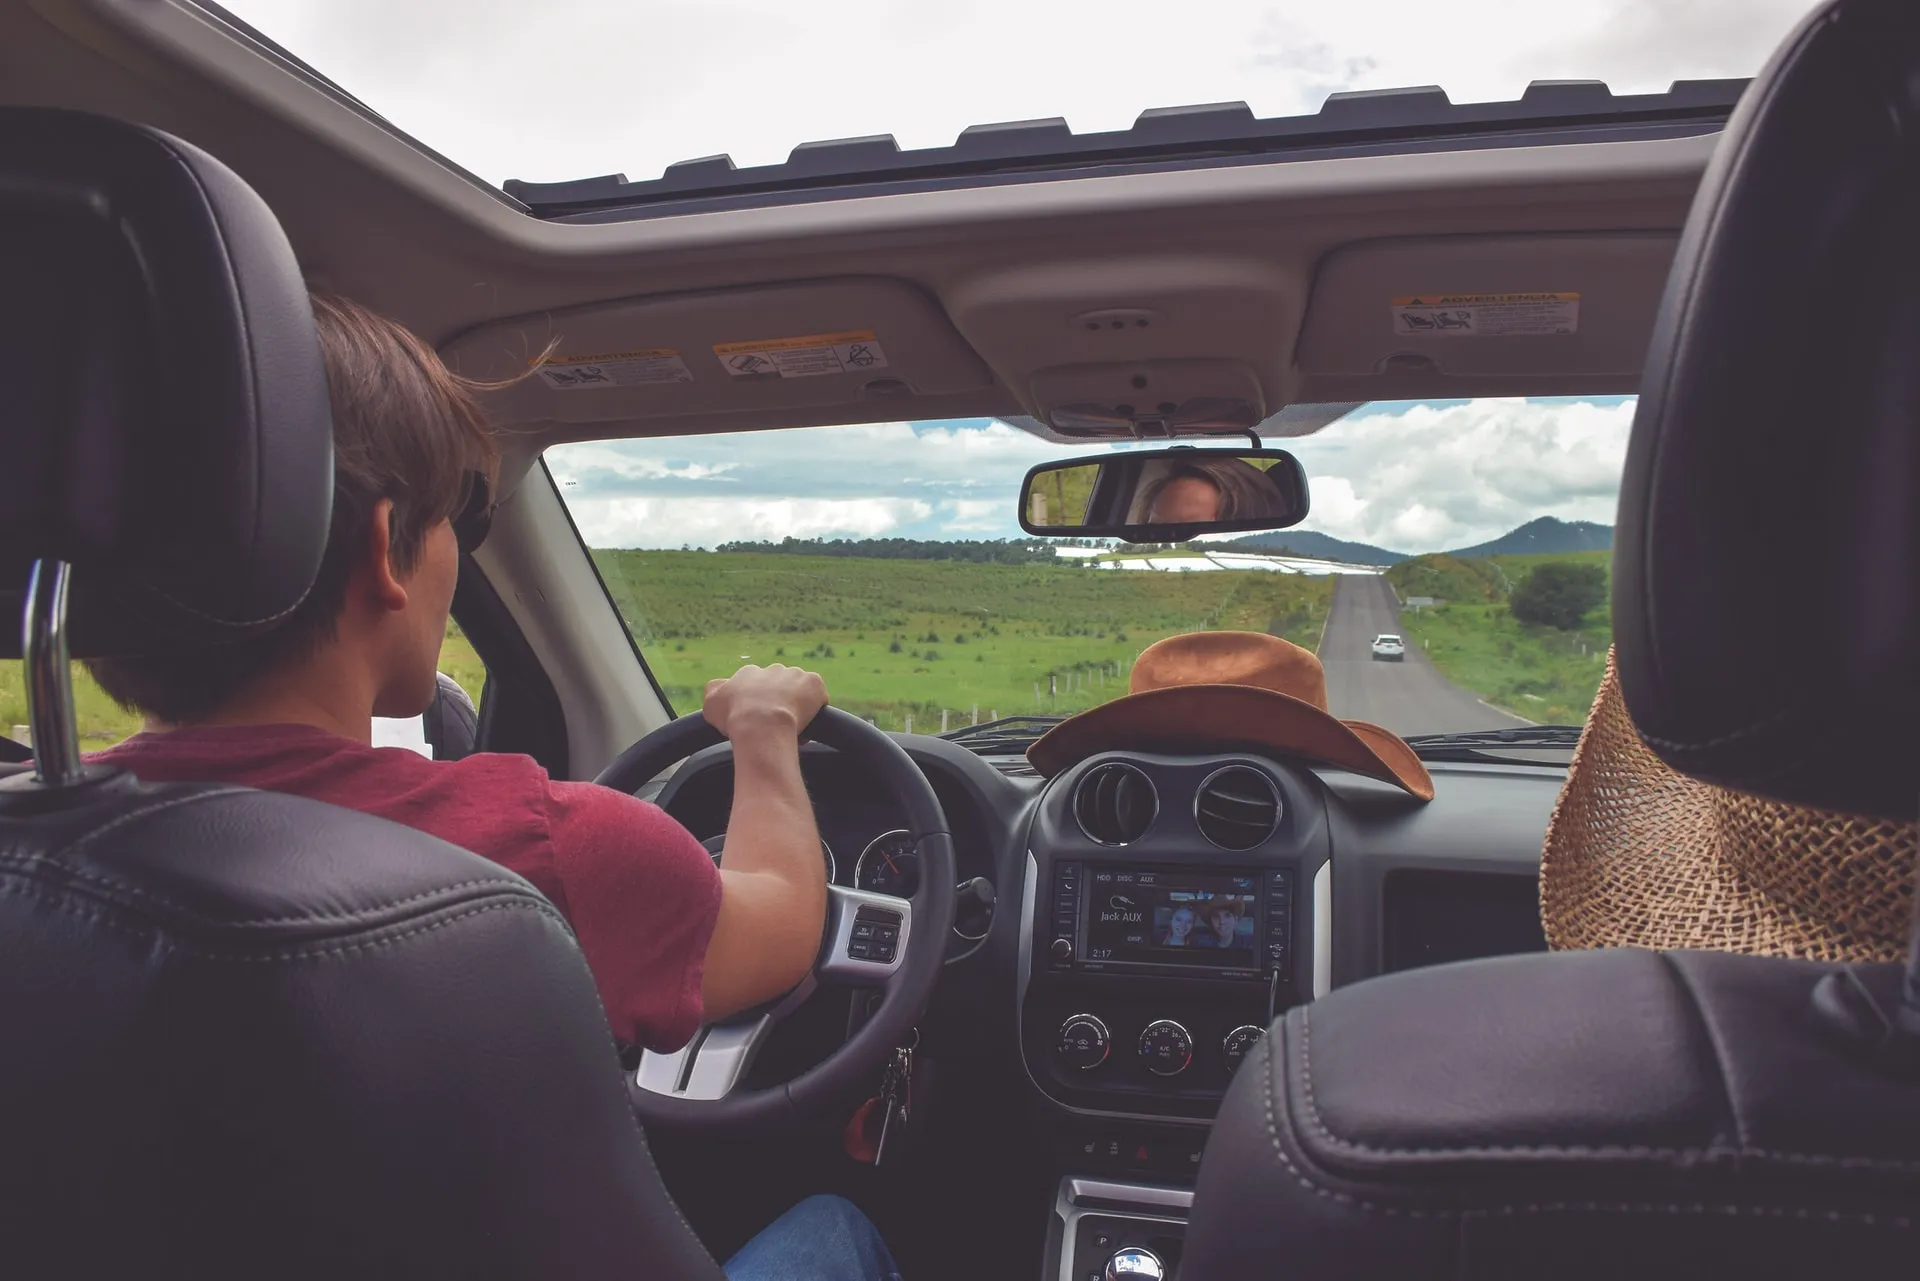 Where to Go on a Road Trip with Friends